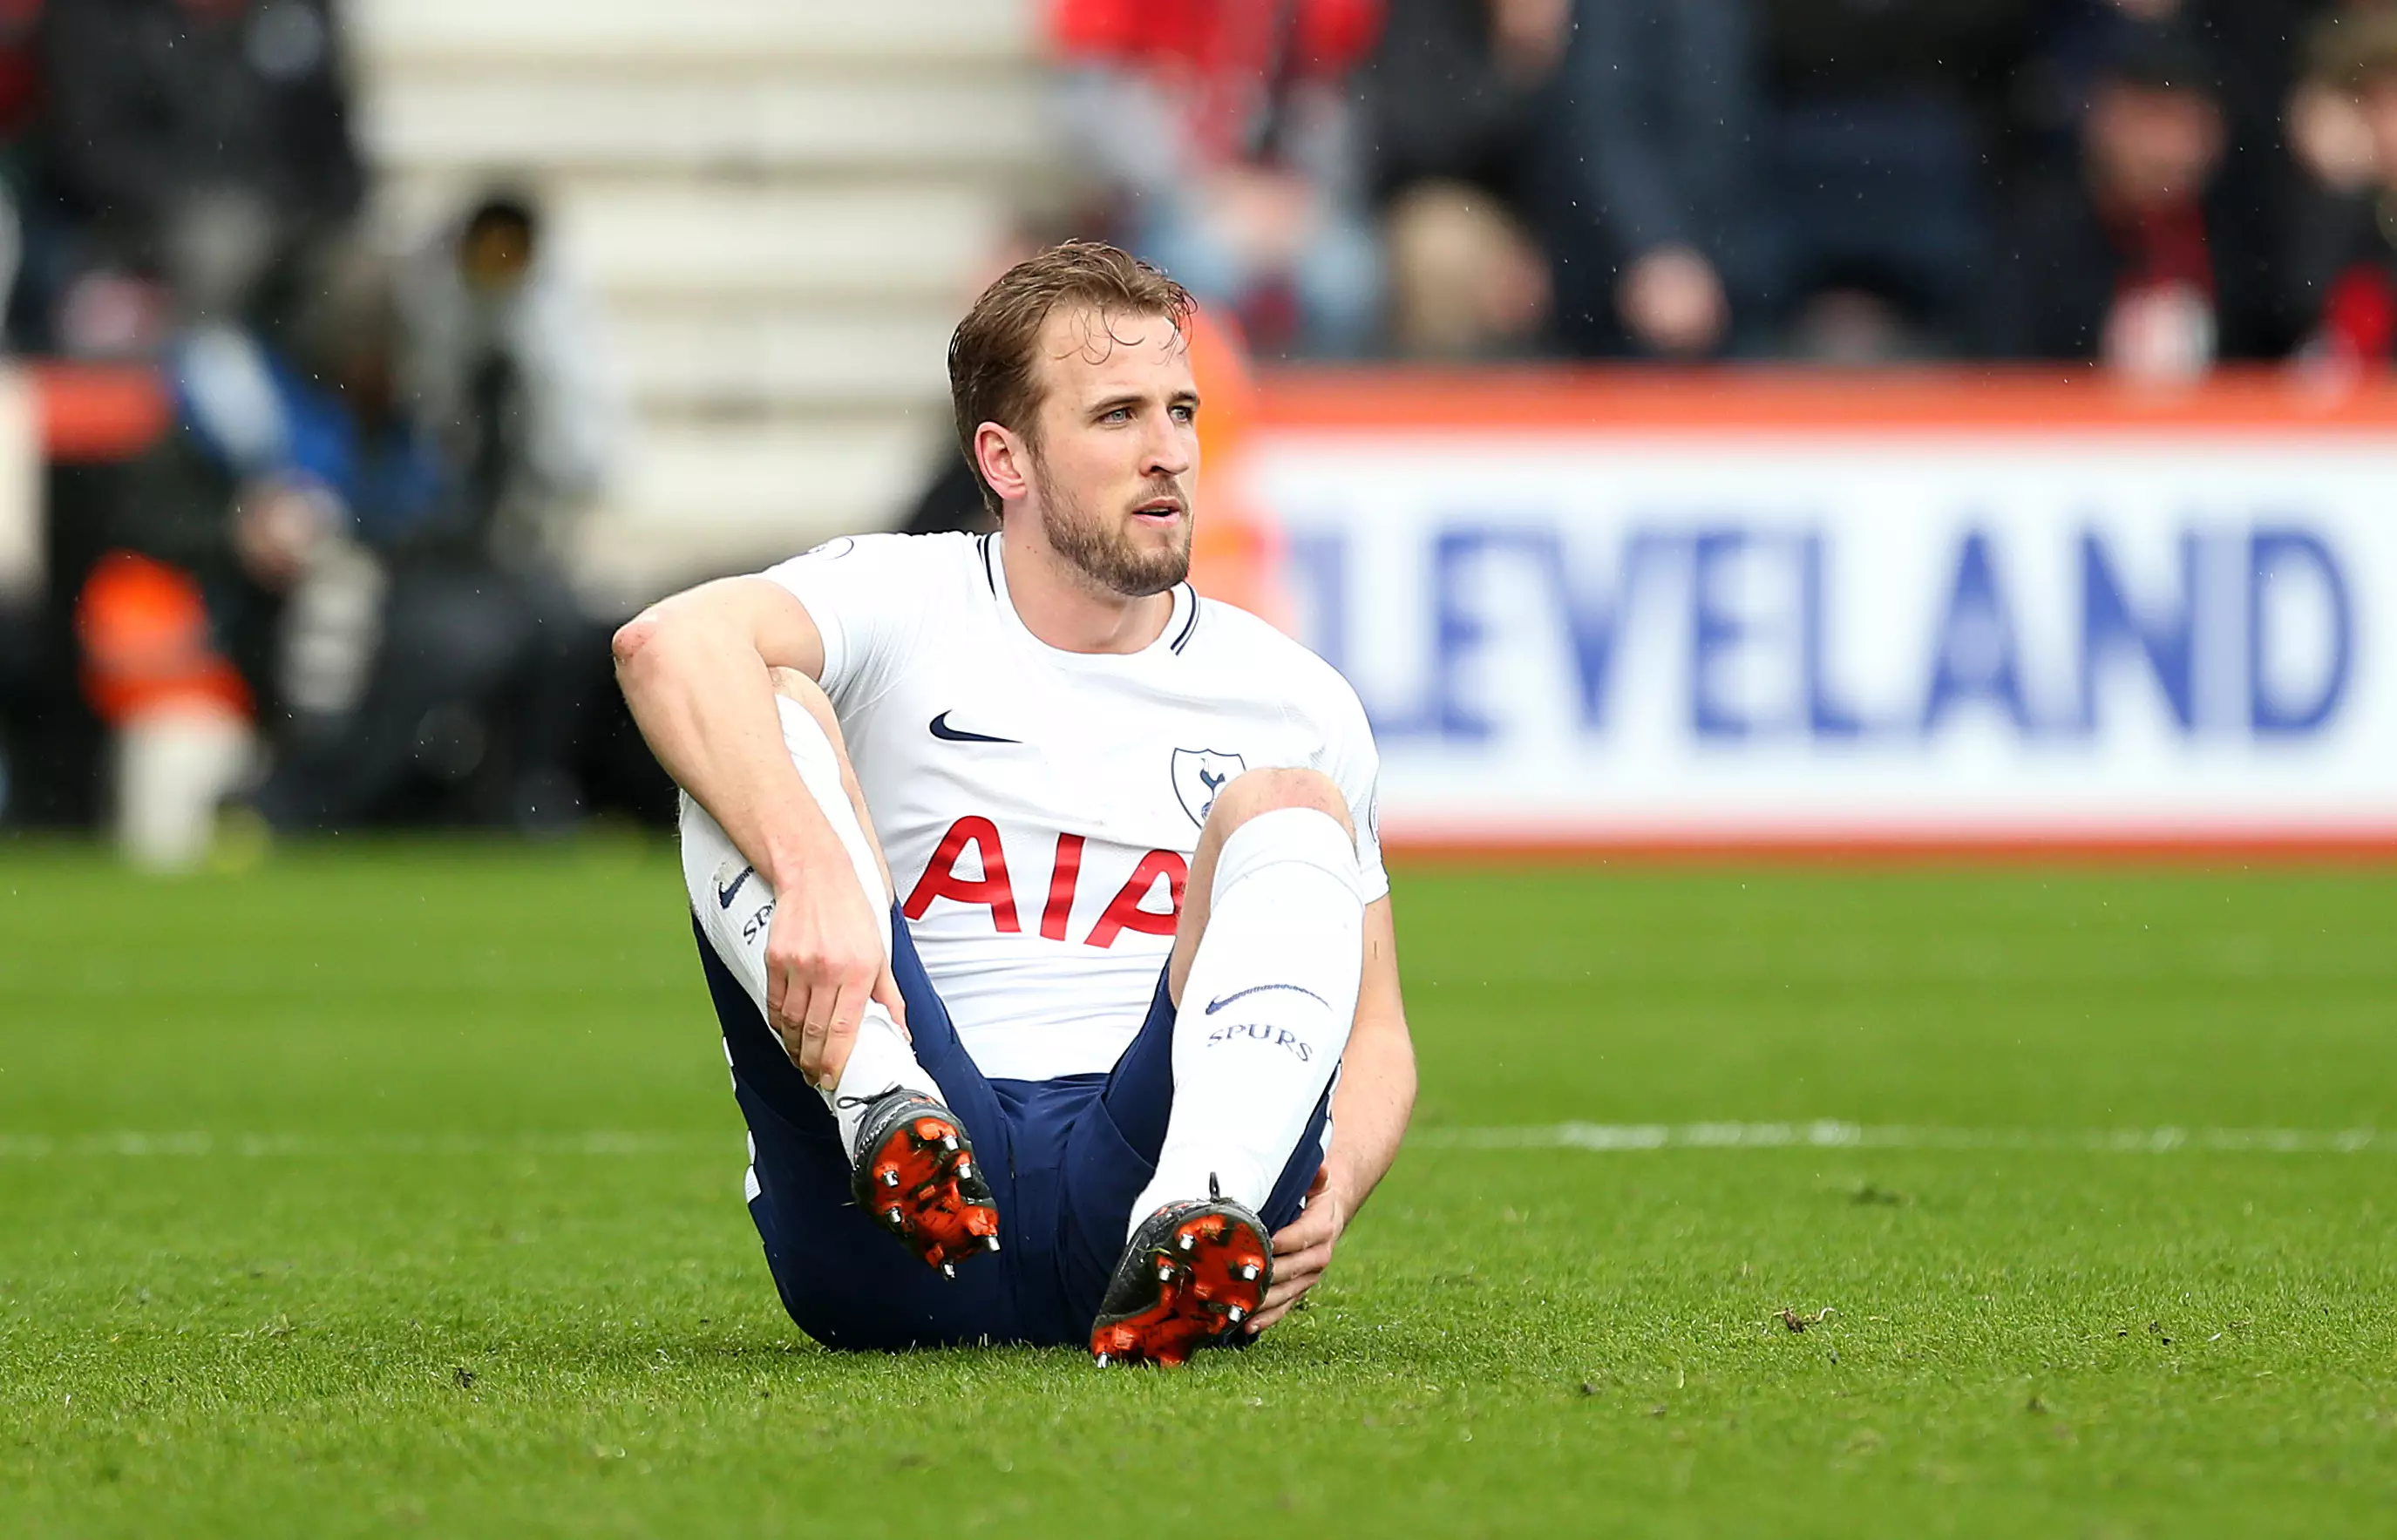 Kane sits on the pitch after suffering an injury. Image: PA